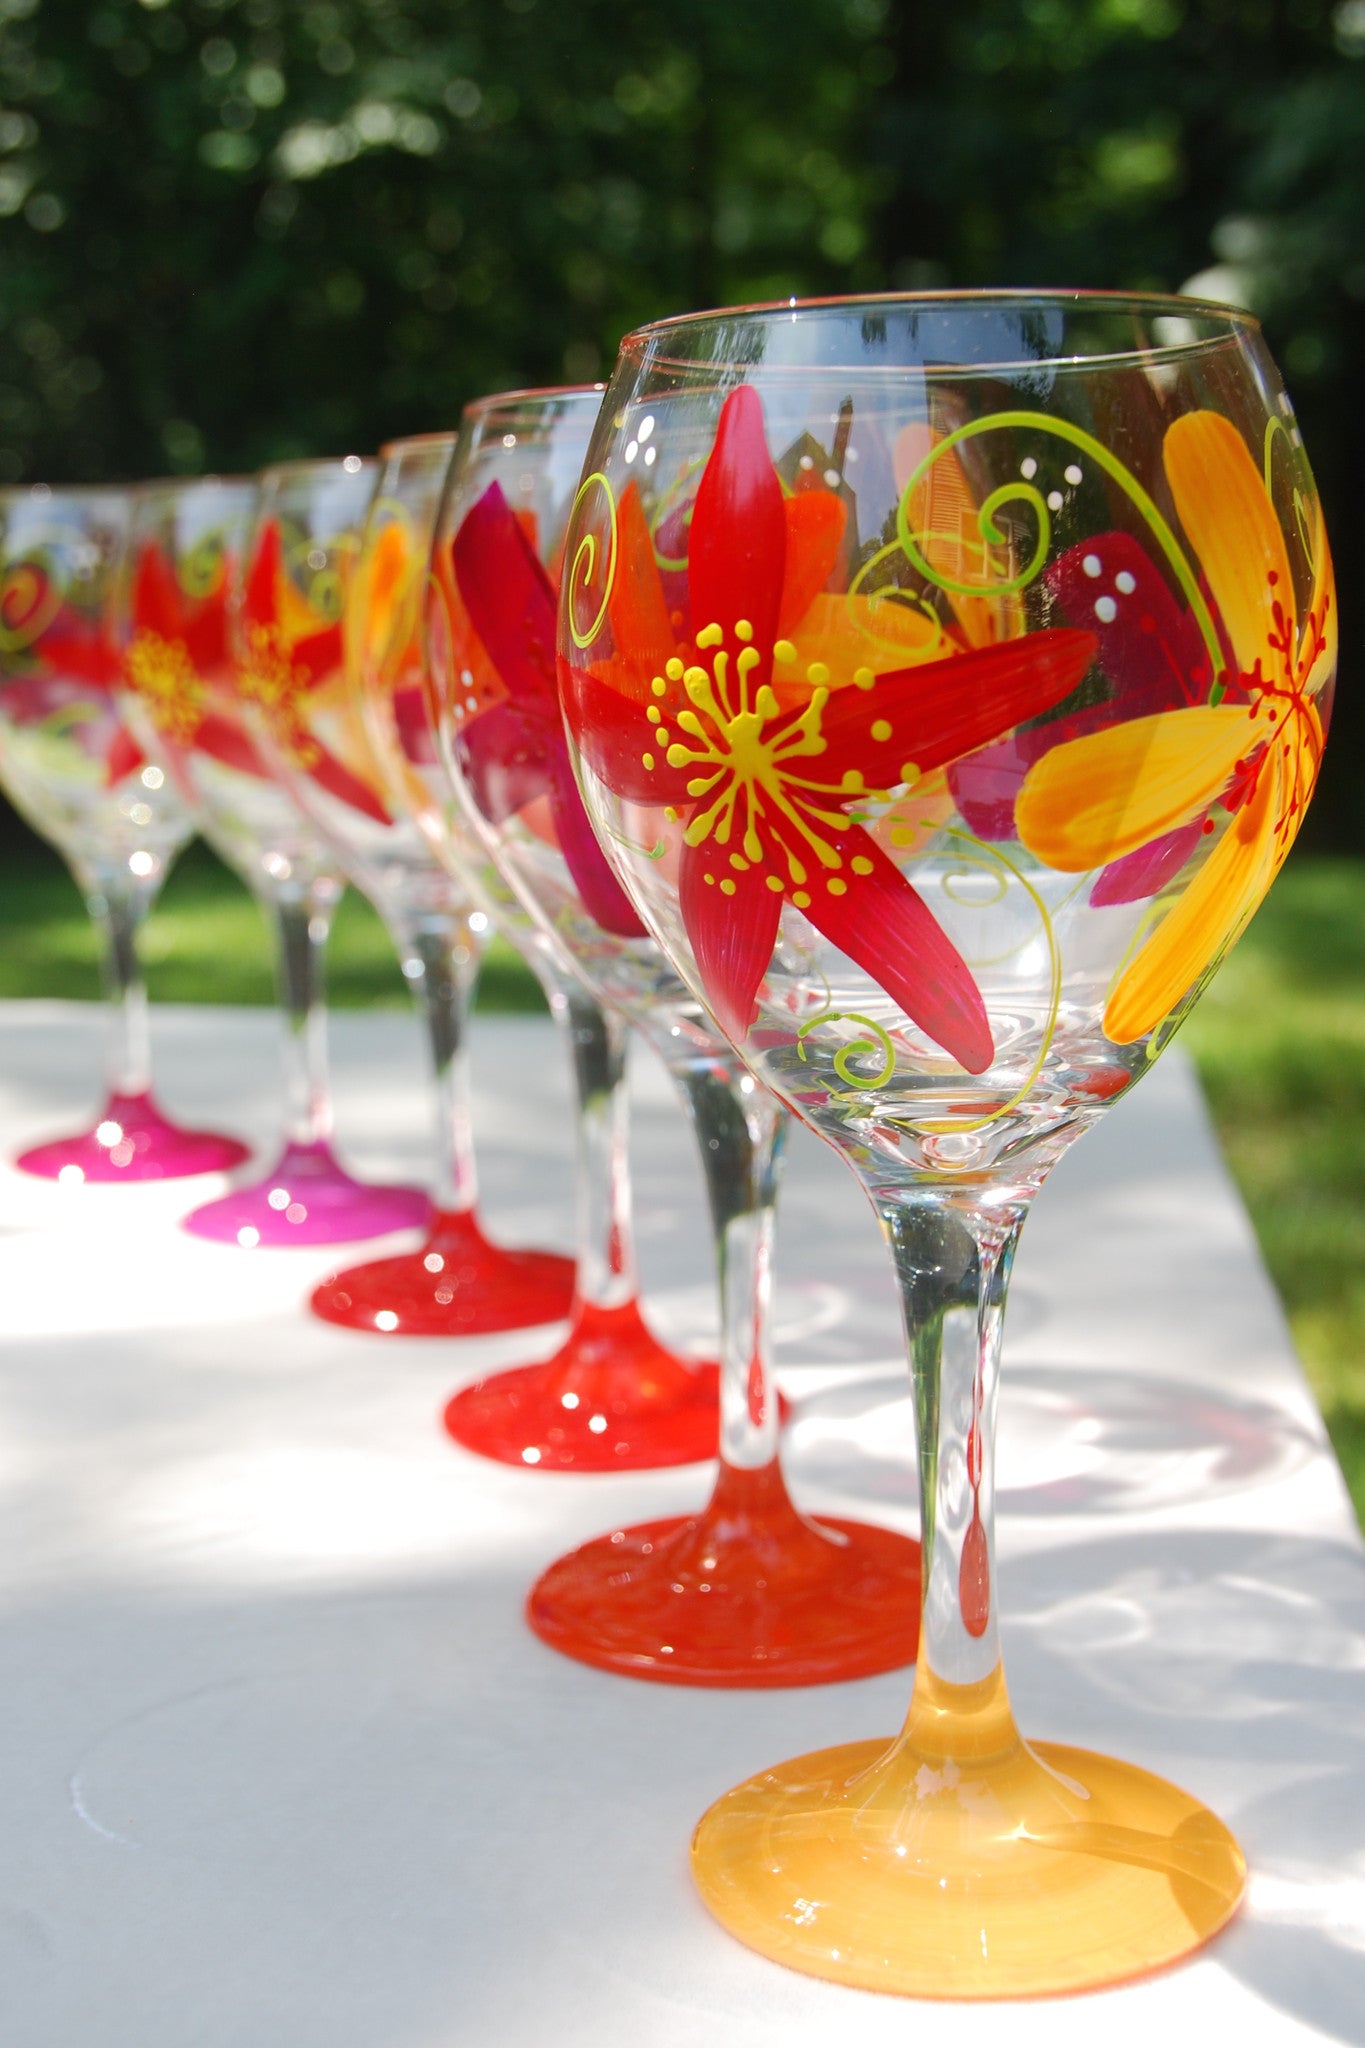 Cavalier Flower Hand-painted Wine Glasses – Glorious Goblets